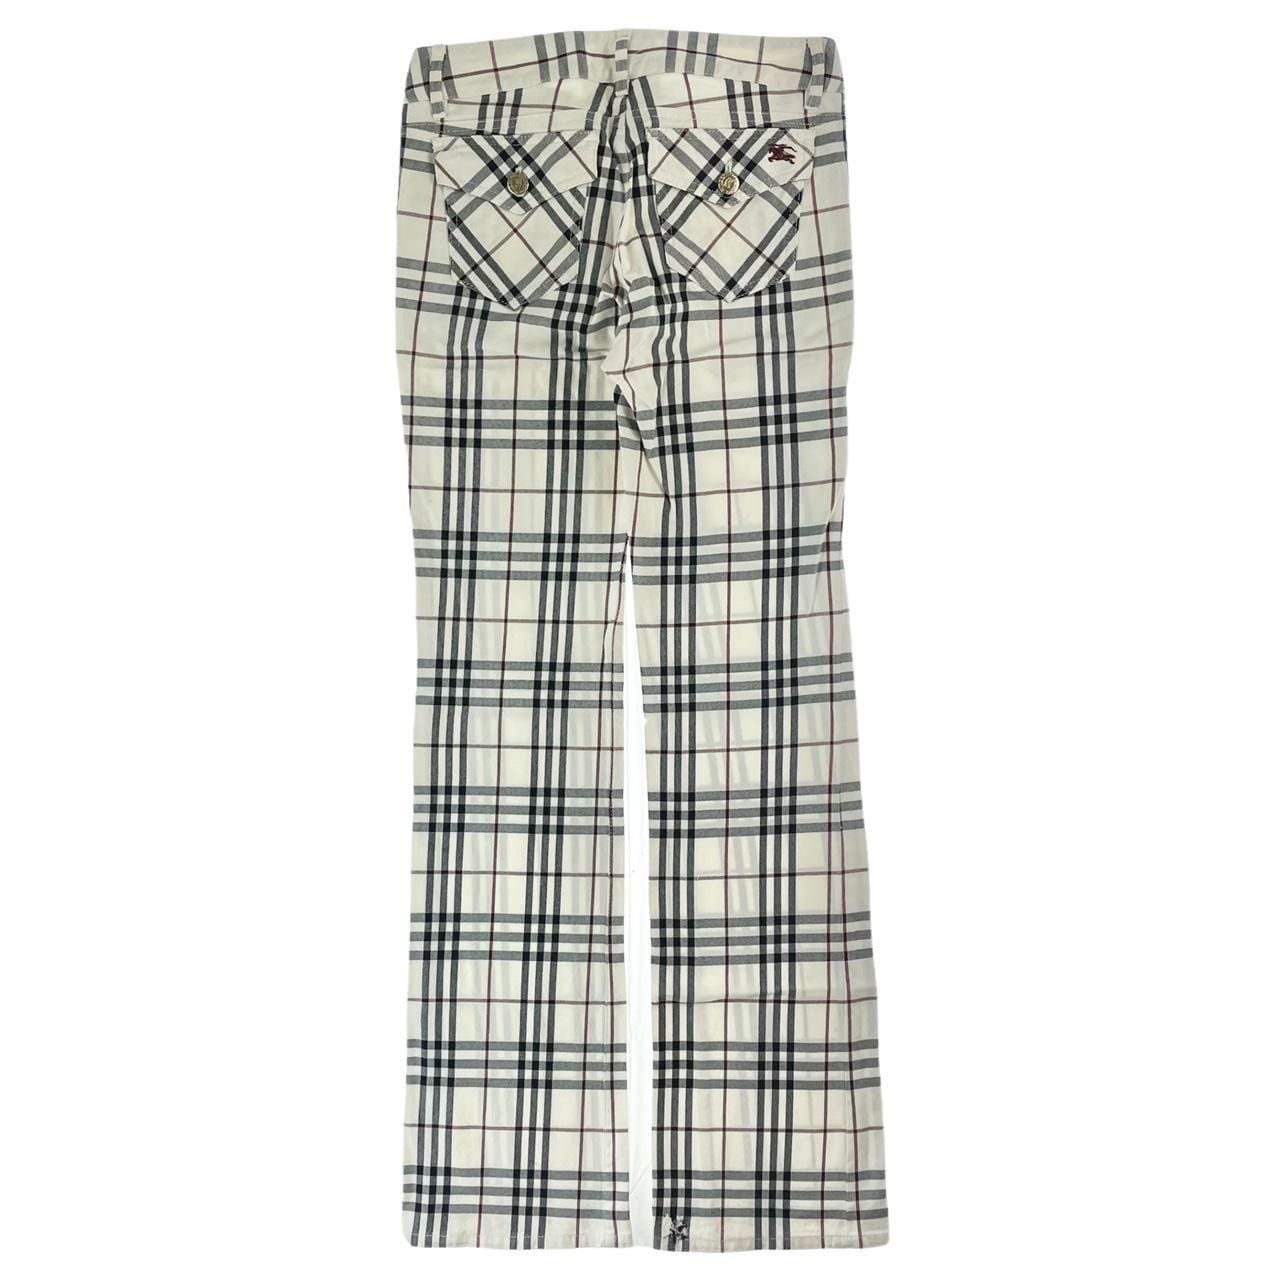 BURBERRY trousers for girl  Beige  Burberry trousers 8057874 online on  GIGLIOCOM